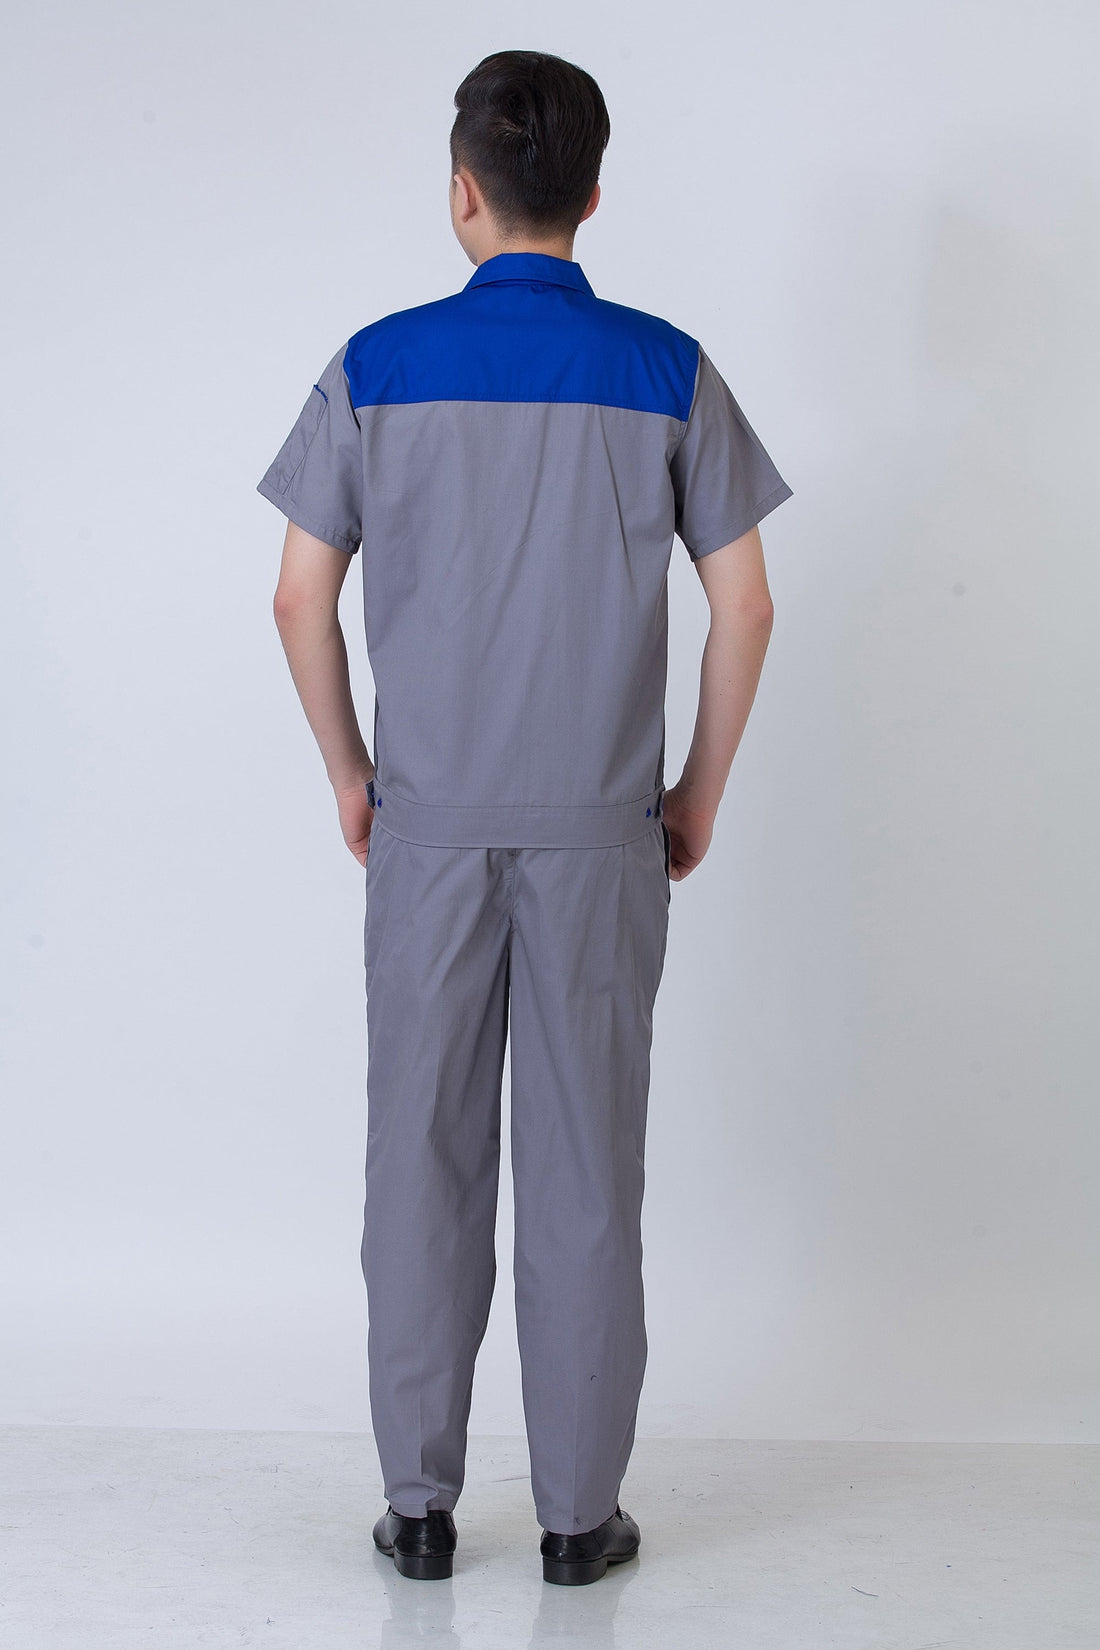 Corals Trading Co. 可樂思百貨商行 涤棉 Short-sleeved polyester cotton overalls for summer SD-S2404